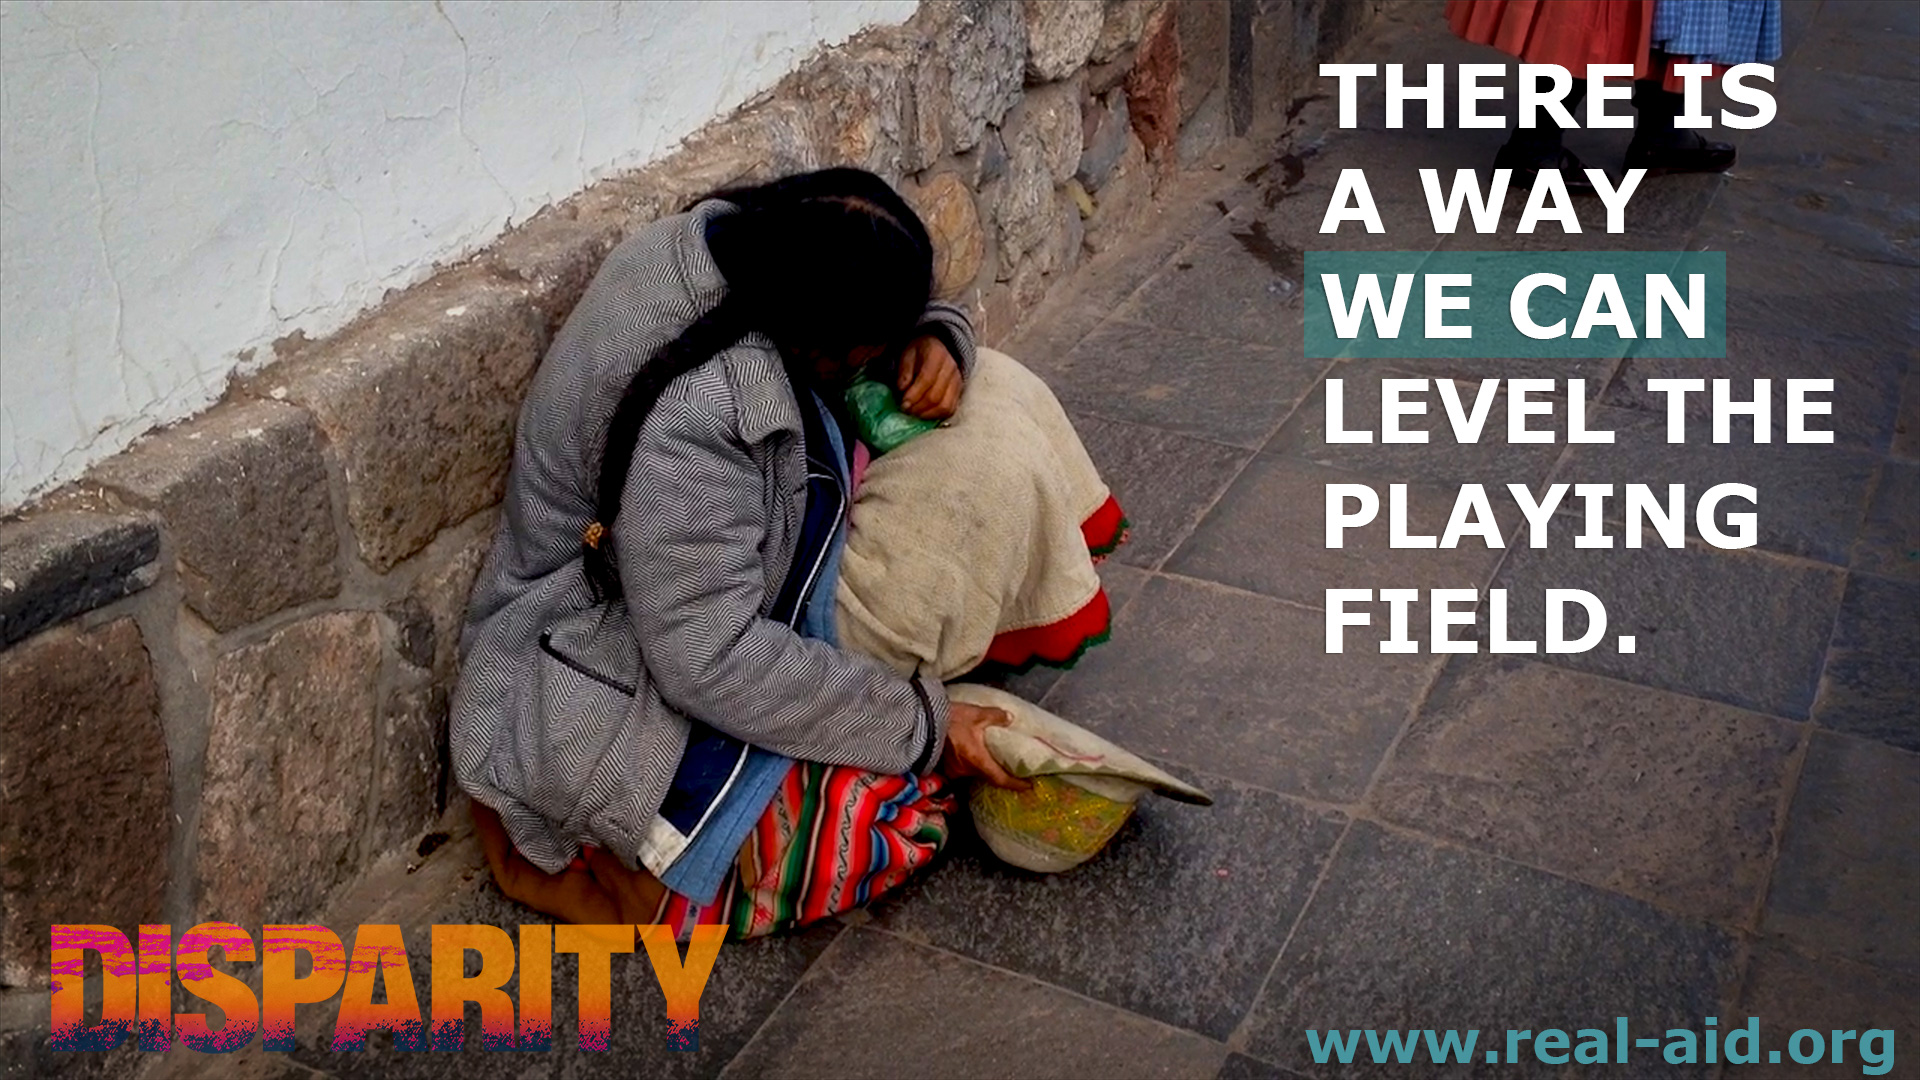 Disparity Film poster, there is a way we can level the playing field quote, south american woman on ground image